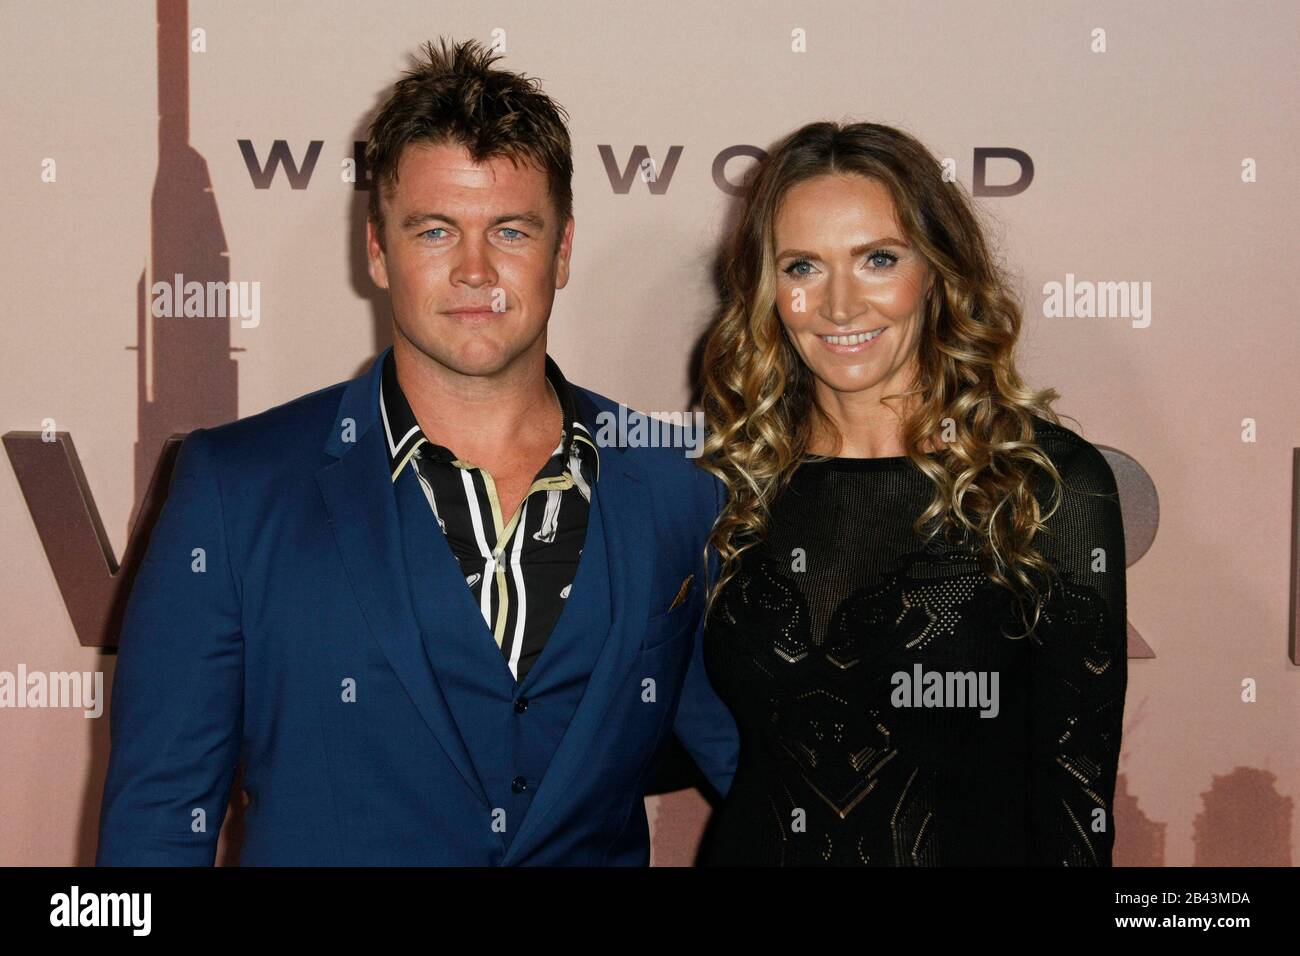 Hollywood, California, USA. Los Angeles, CA. 05th Mar, 2020. Luke Hemsworth and Samantha Hemsworth attend HBO's Season 3 Premiere of 'Westworld' at the TCL Chinese Theatres on March 5, 2020 in Los Angeles, CA. Credit: Craig Hattori/Image Space/Media Punch/Alamy Live News Credit: MediaPunch Inc/Alamy Live News Stock Photo